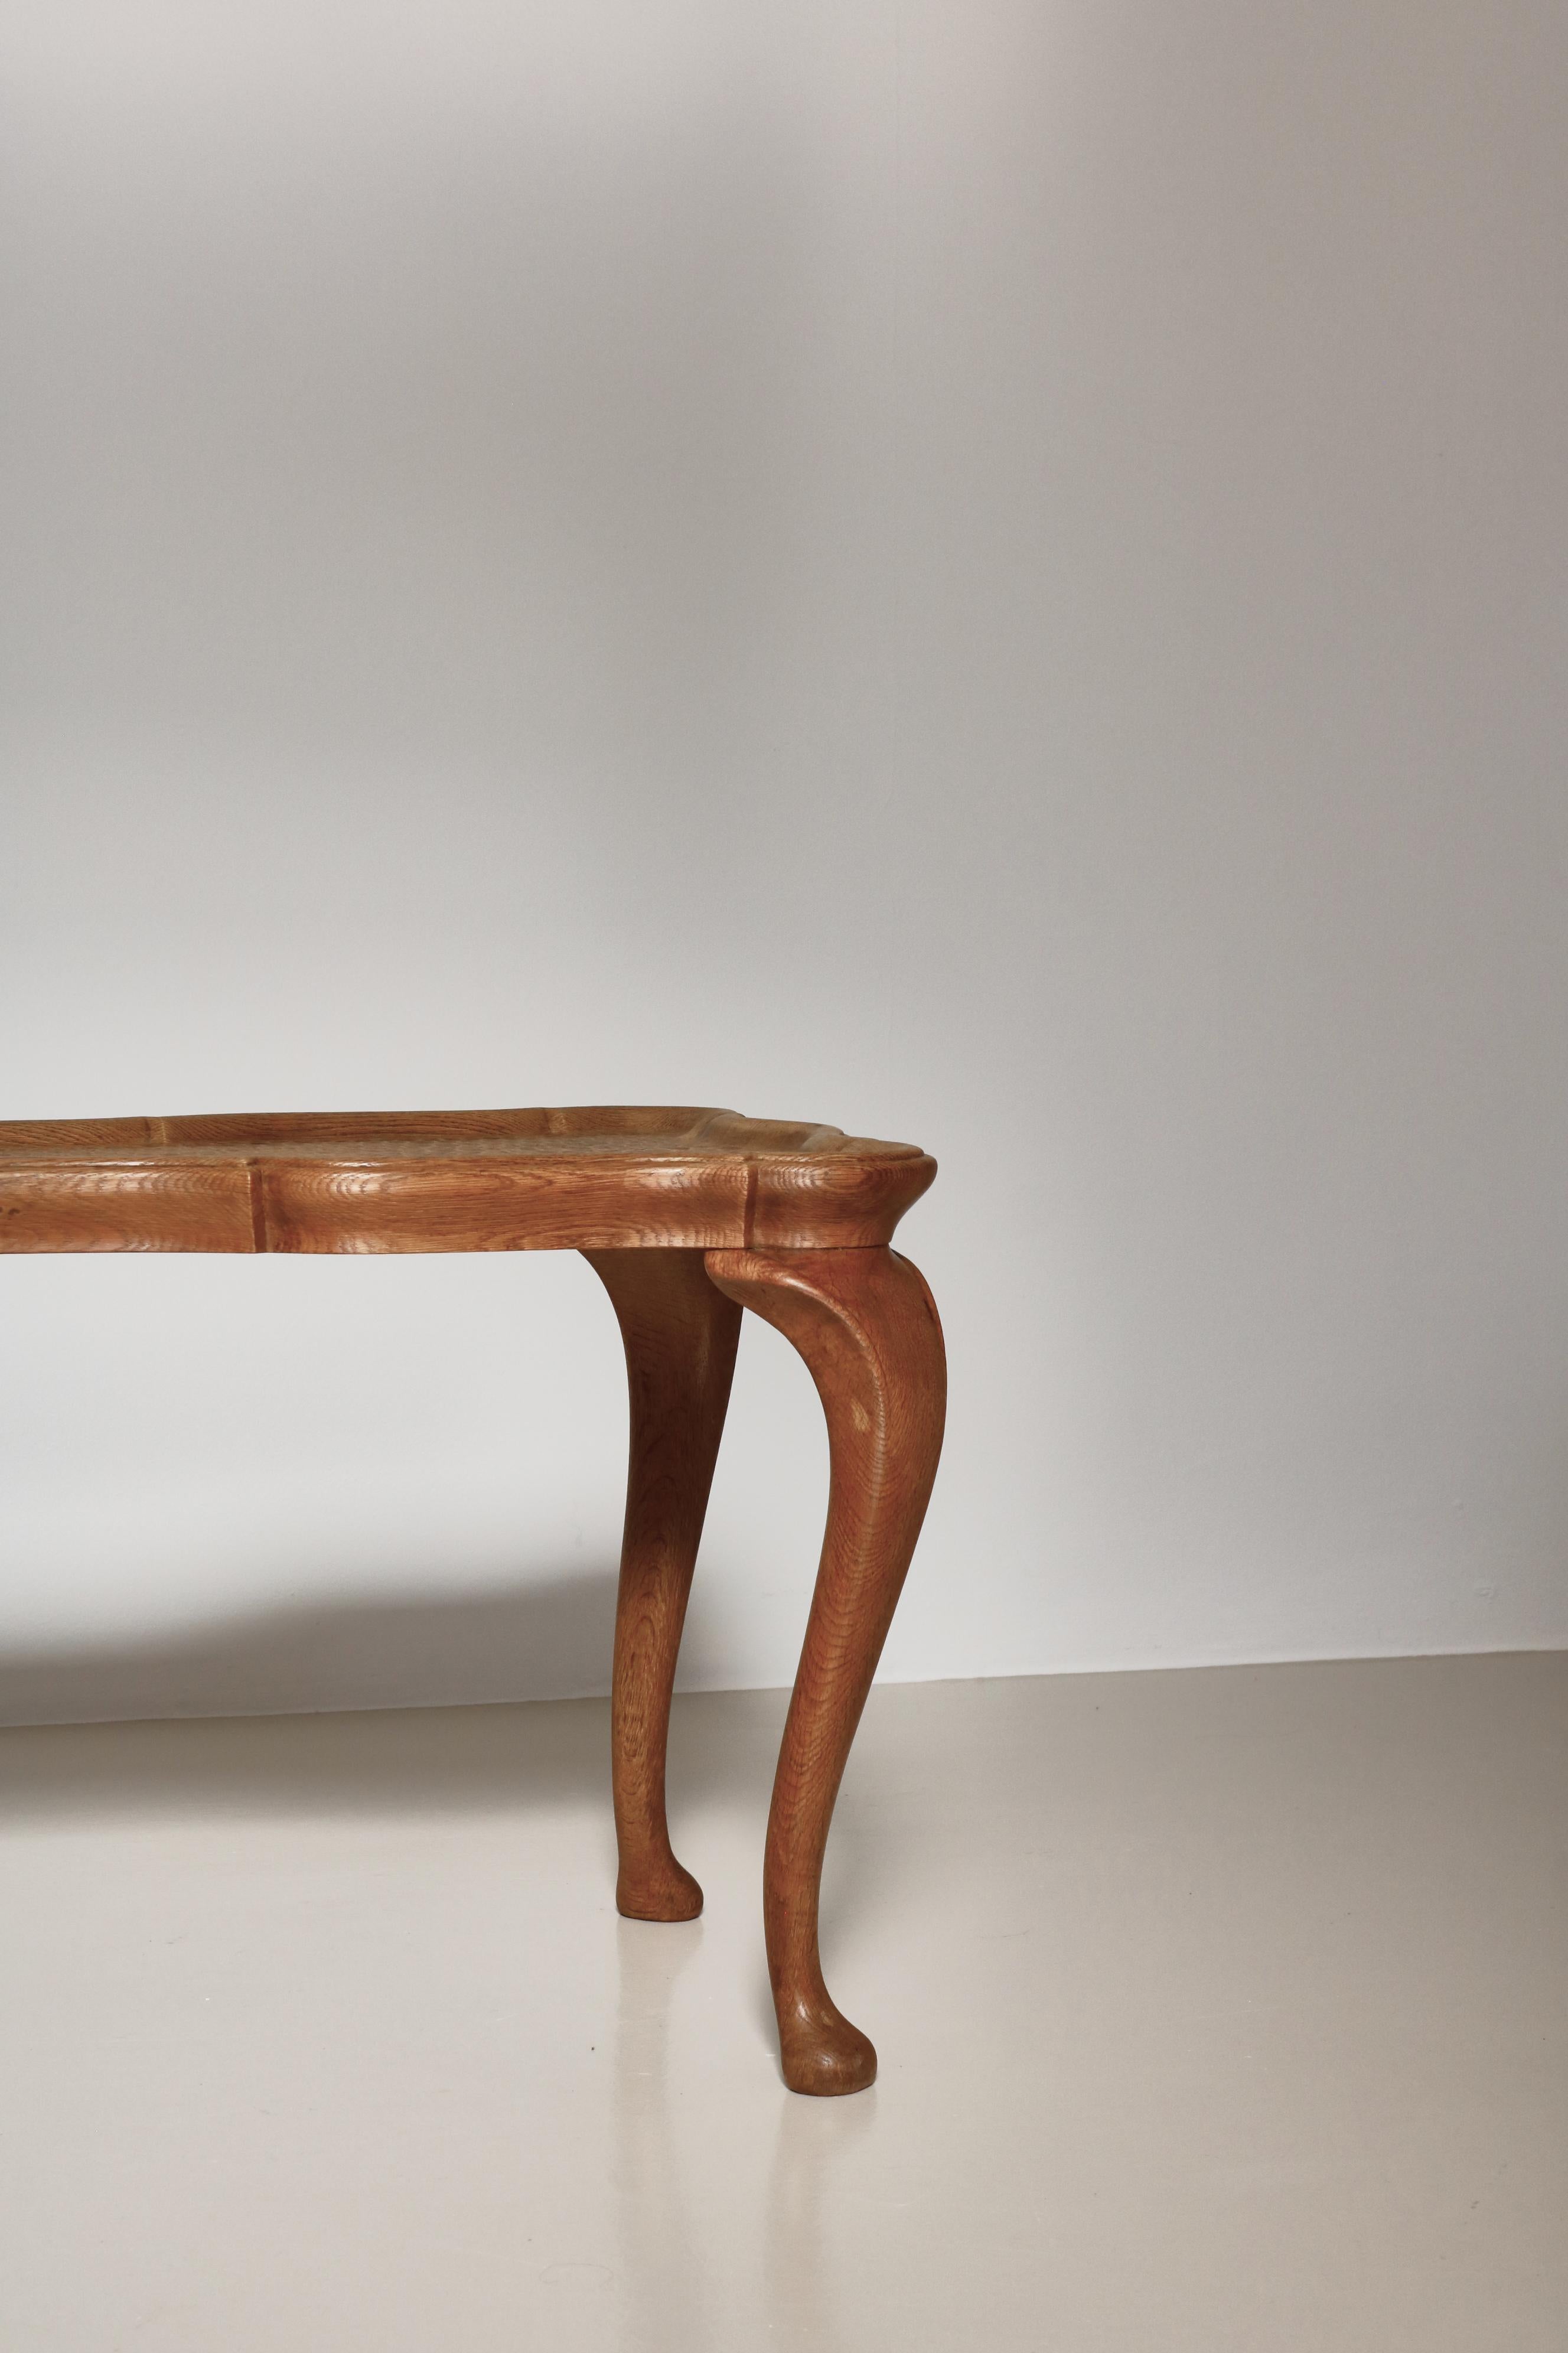 Danish Frits Henningsen Carved Coffee Table with Gouged Top Solid Oak, Denmark, 1940s For Sale